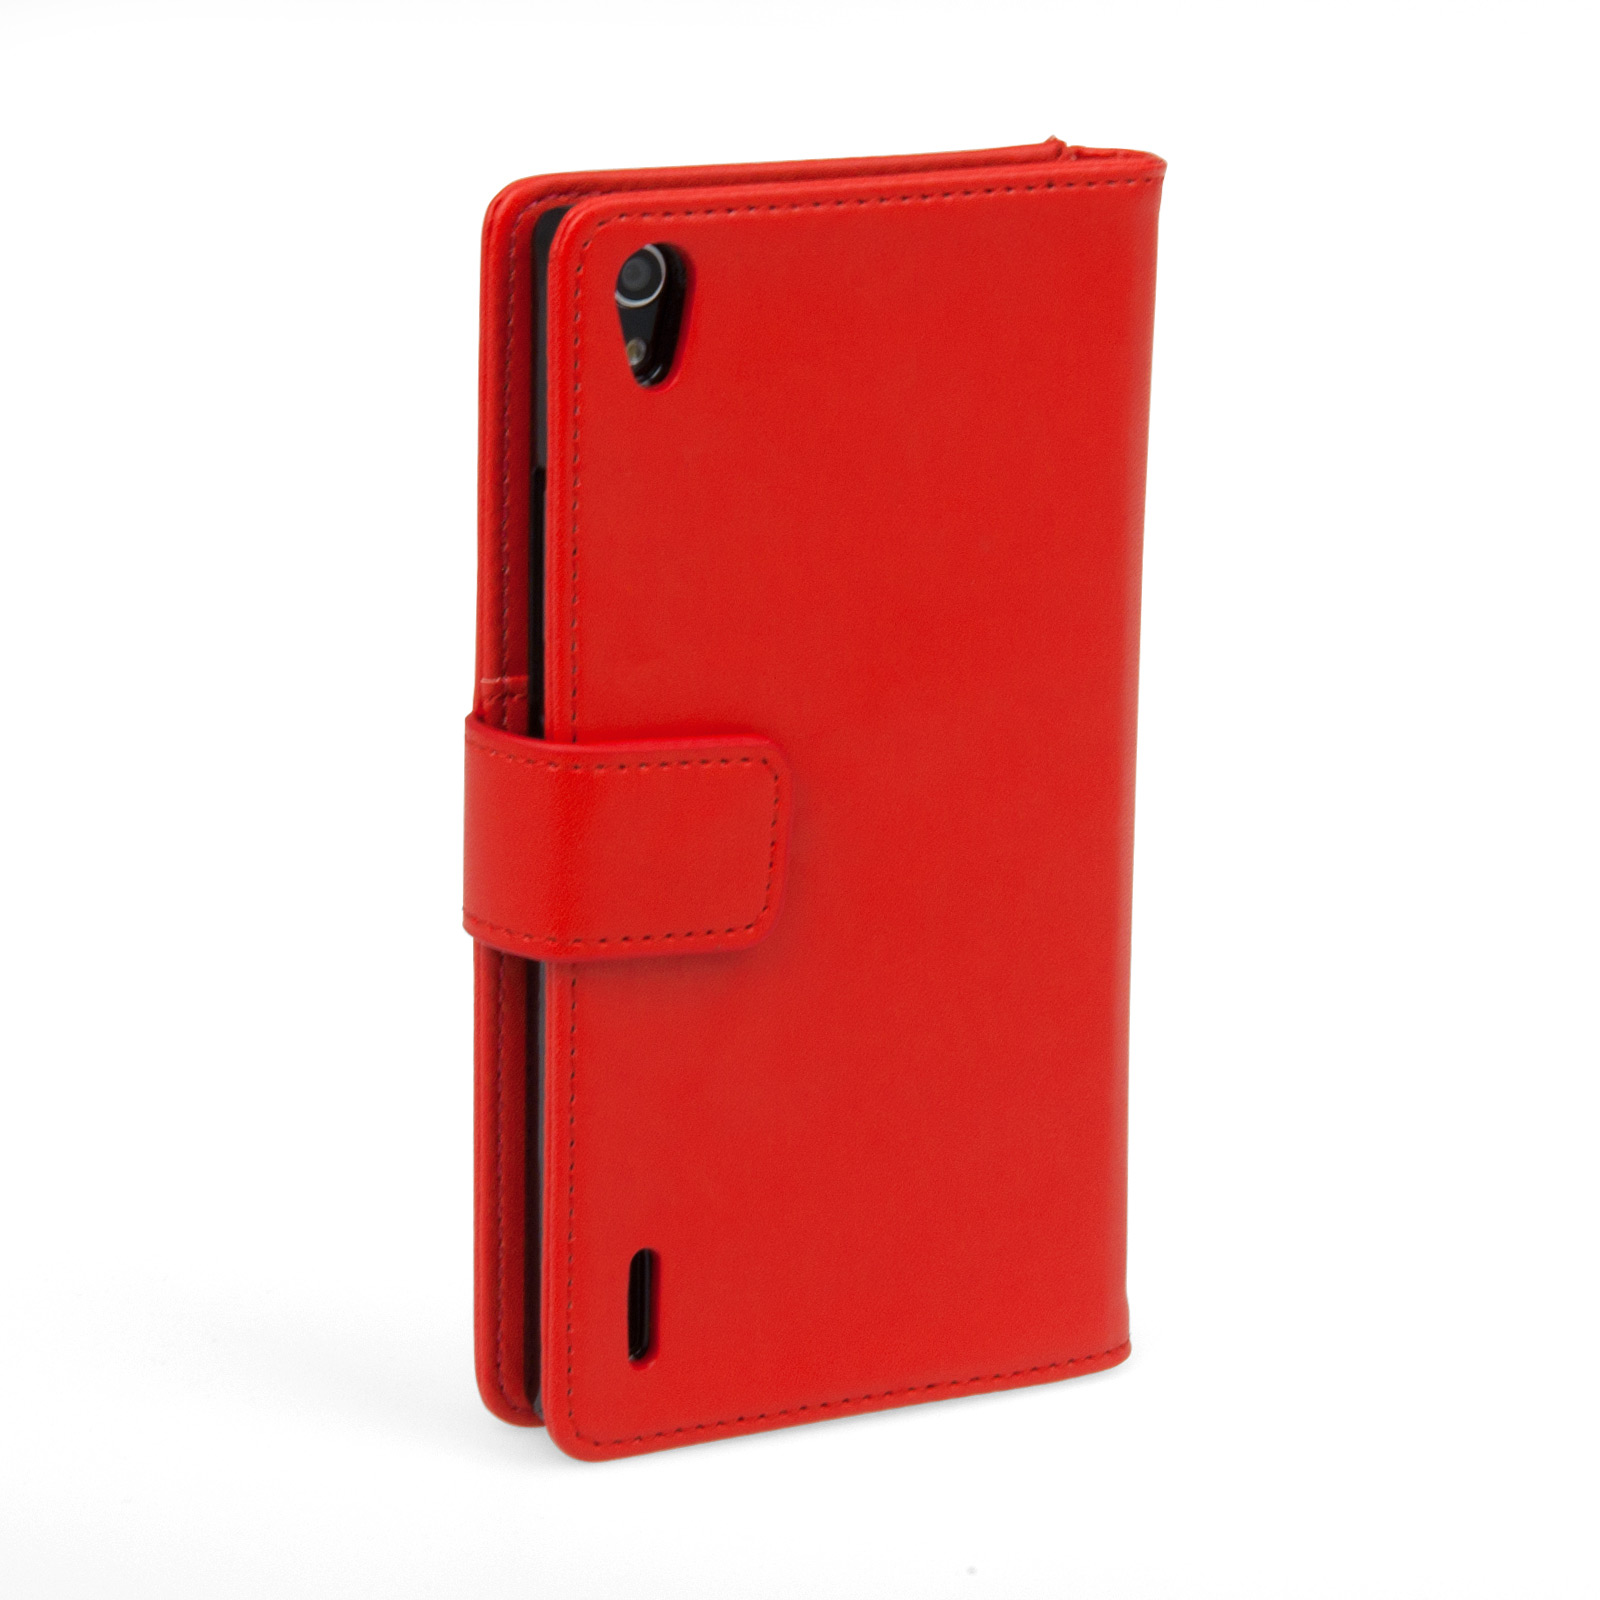 YouSave Accessories Huawei Ascend P7 Leather-Effect Wallet Case - Red